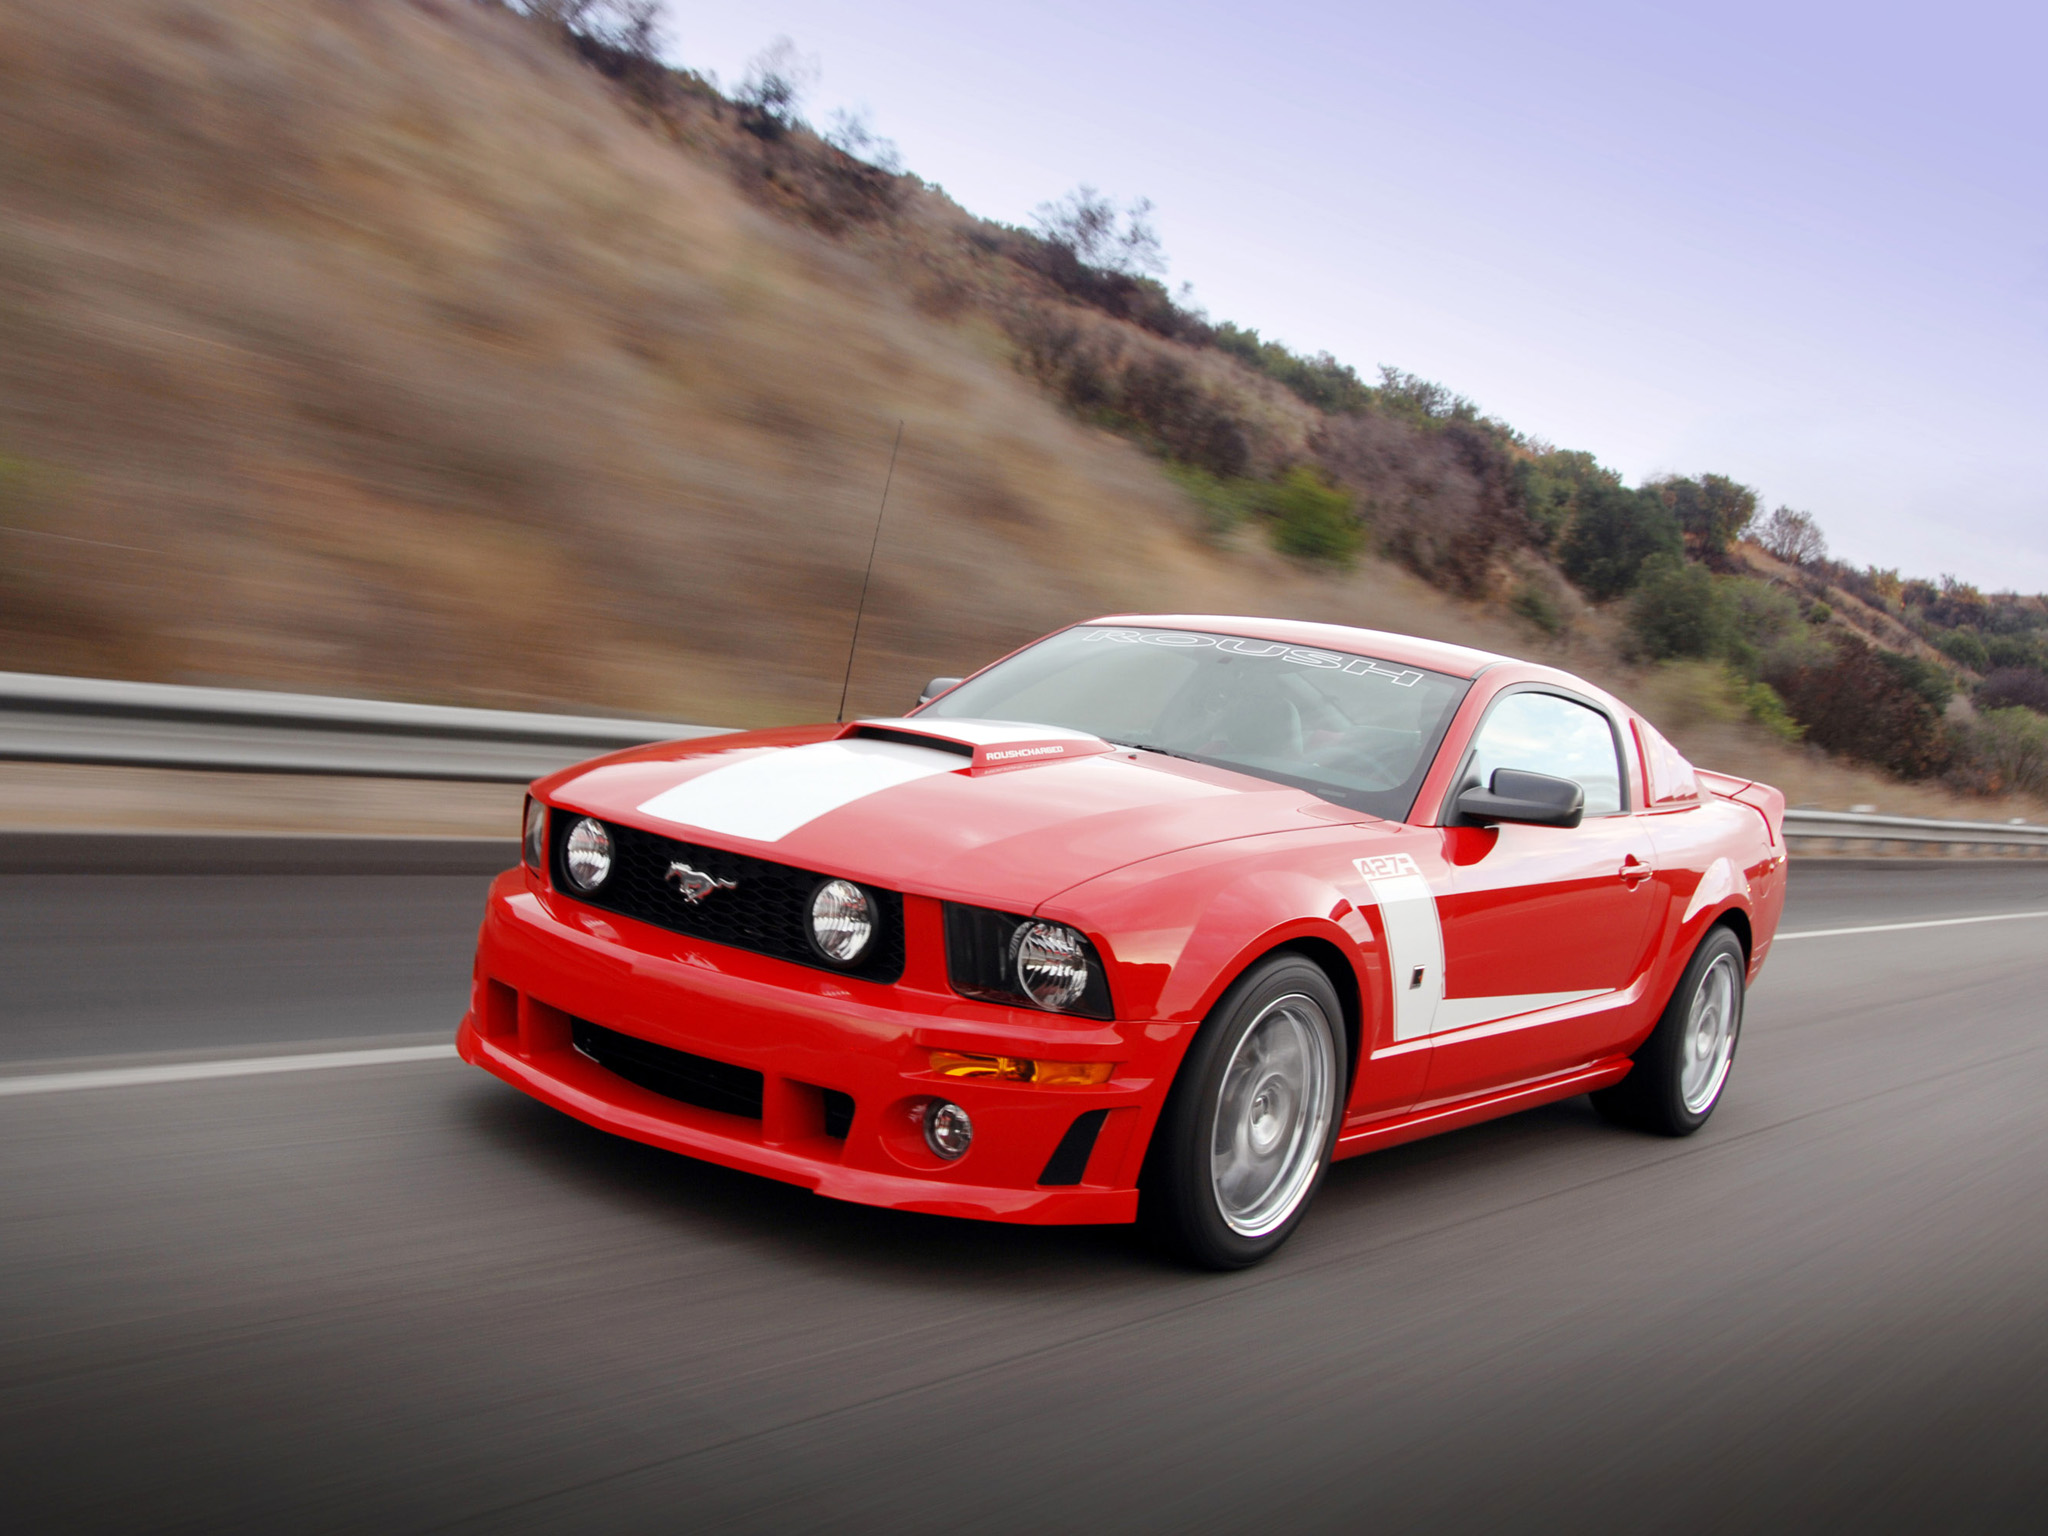 2009, Roush, Ford, Mustang, 427r, Muscle, Tuning, Hot, Rod, Rods, Hd Wallpaper